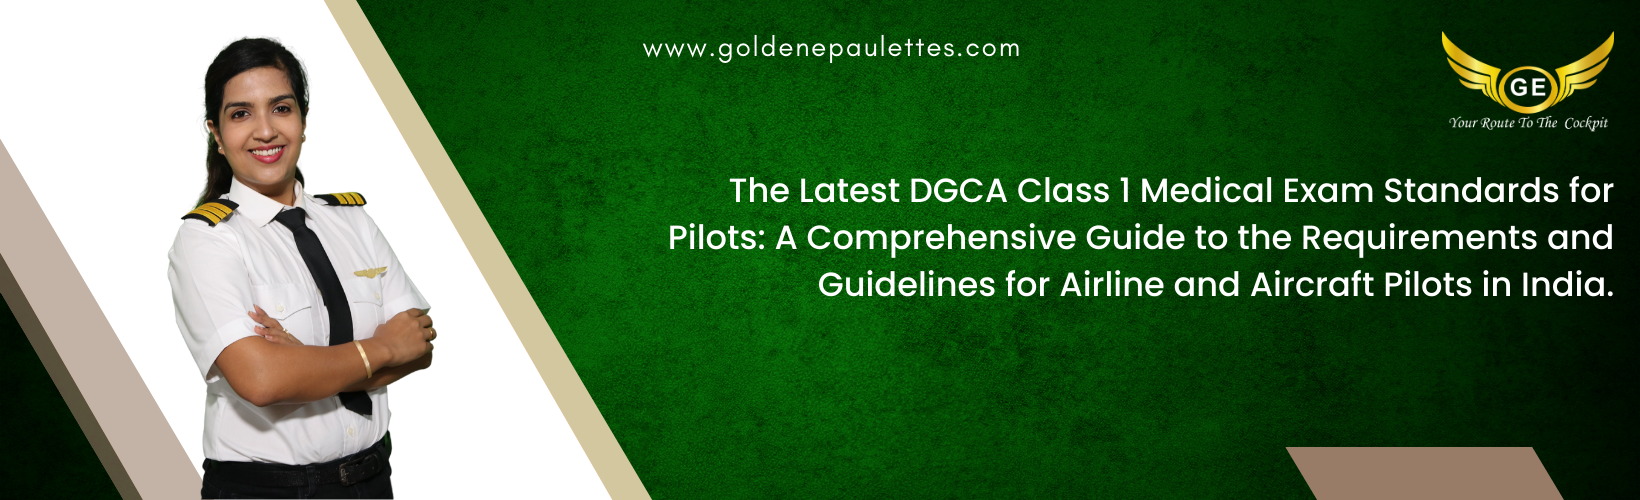 The Latest DGCA Class 1 Medical Exam Standards for Pilots